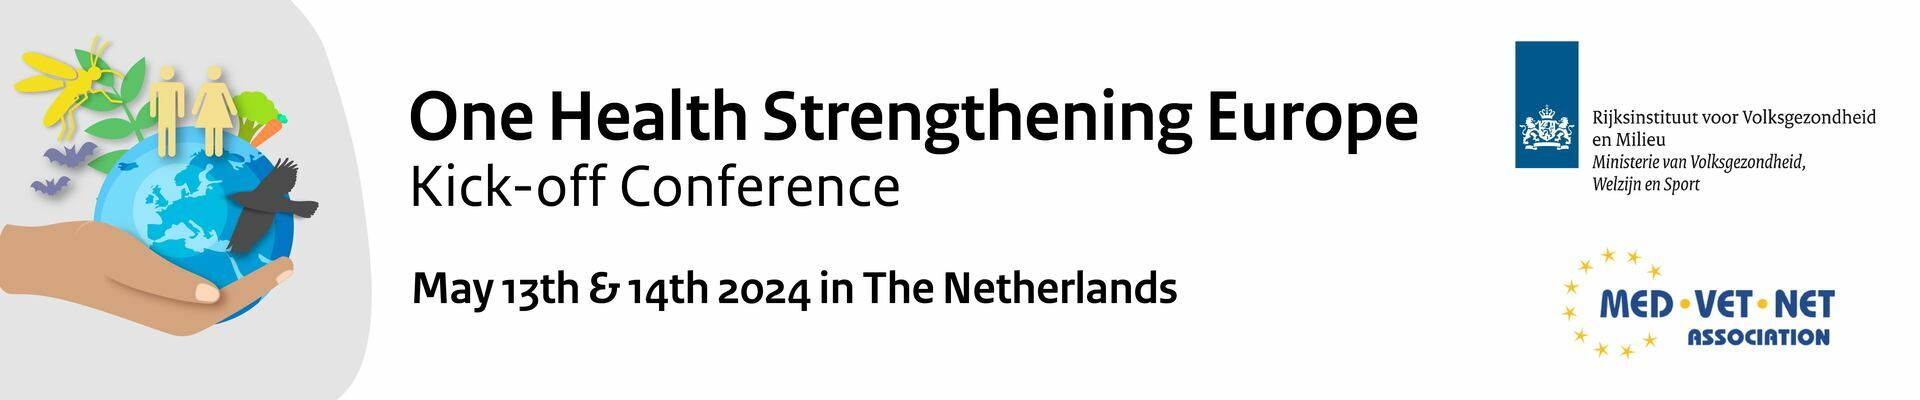 One Health Strengthening Europe Kick-off Conference